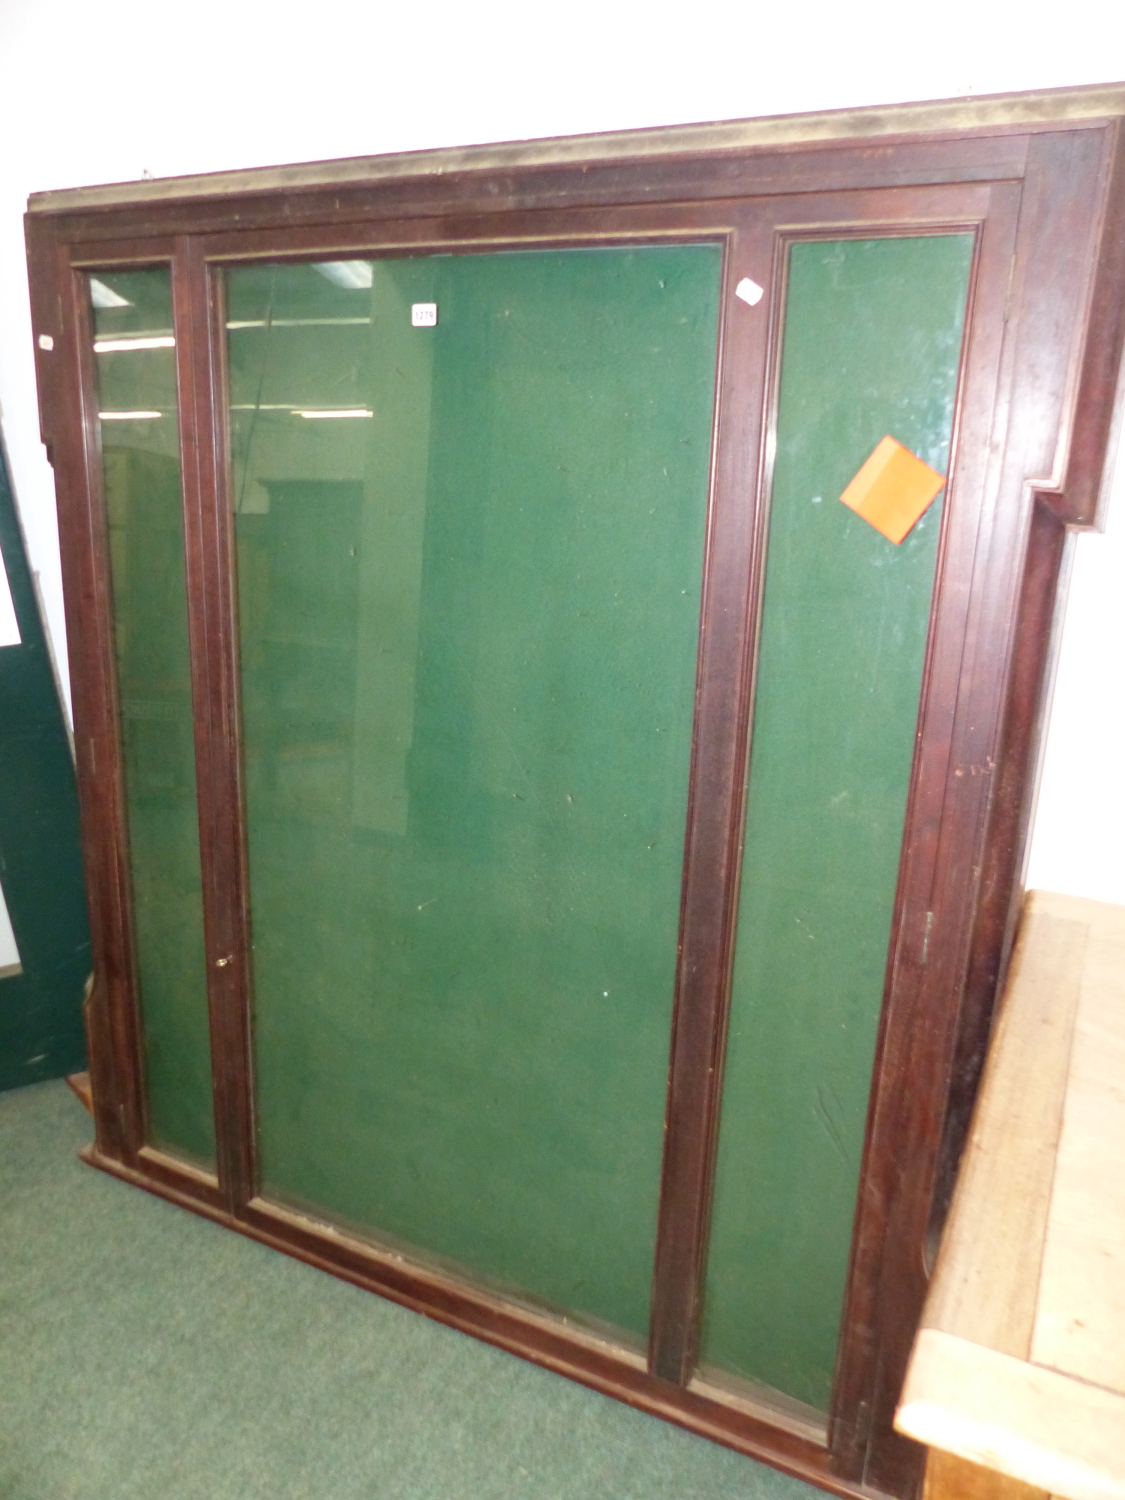 A LATE VICTORIAN MAHOGANY FRAMED GLAZED ROSETTE CABINET OR NOTICE BOARD WITH LOCKING CENTRAL DOOR.